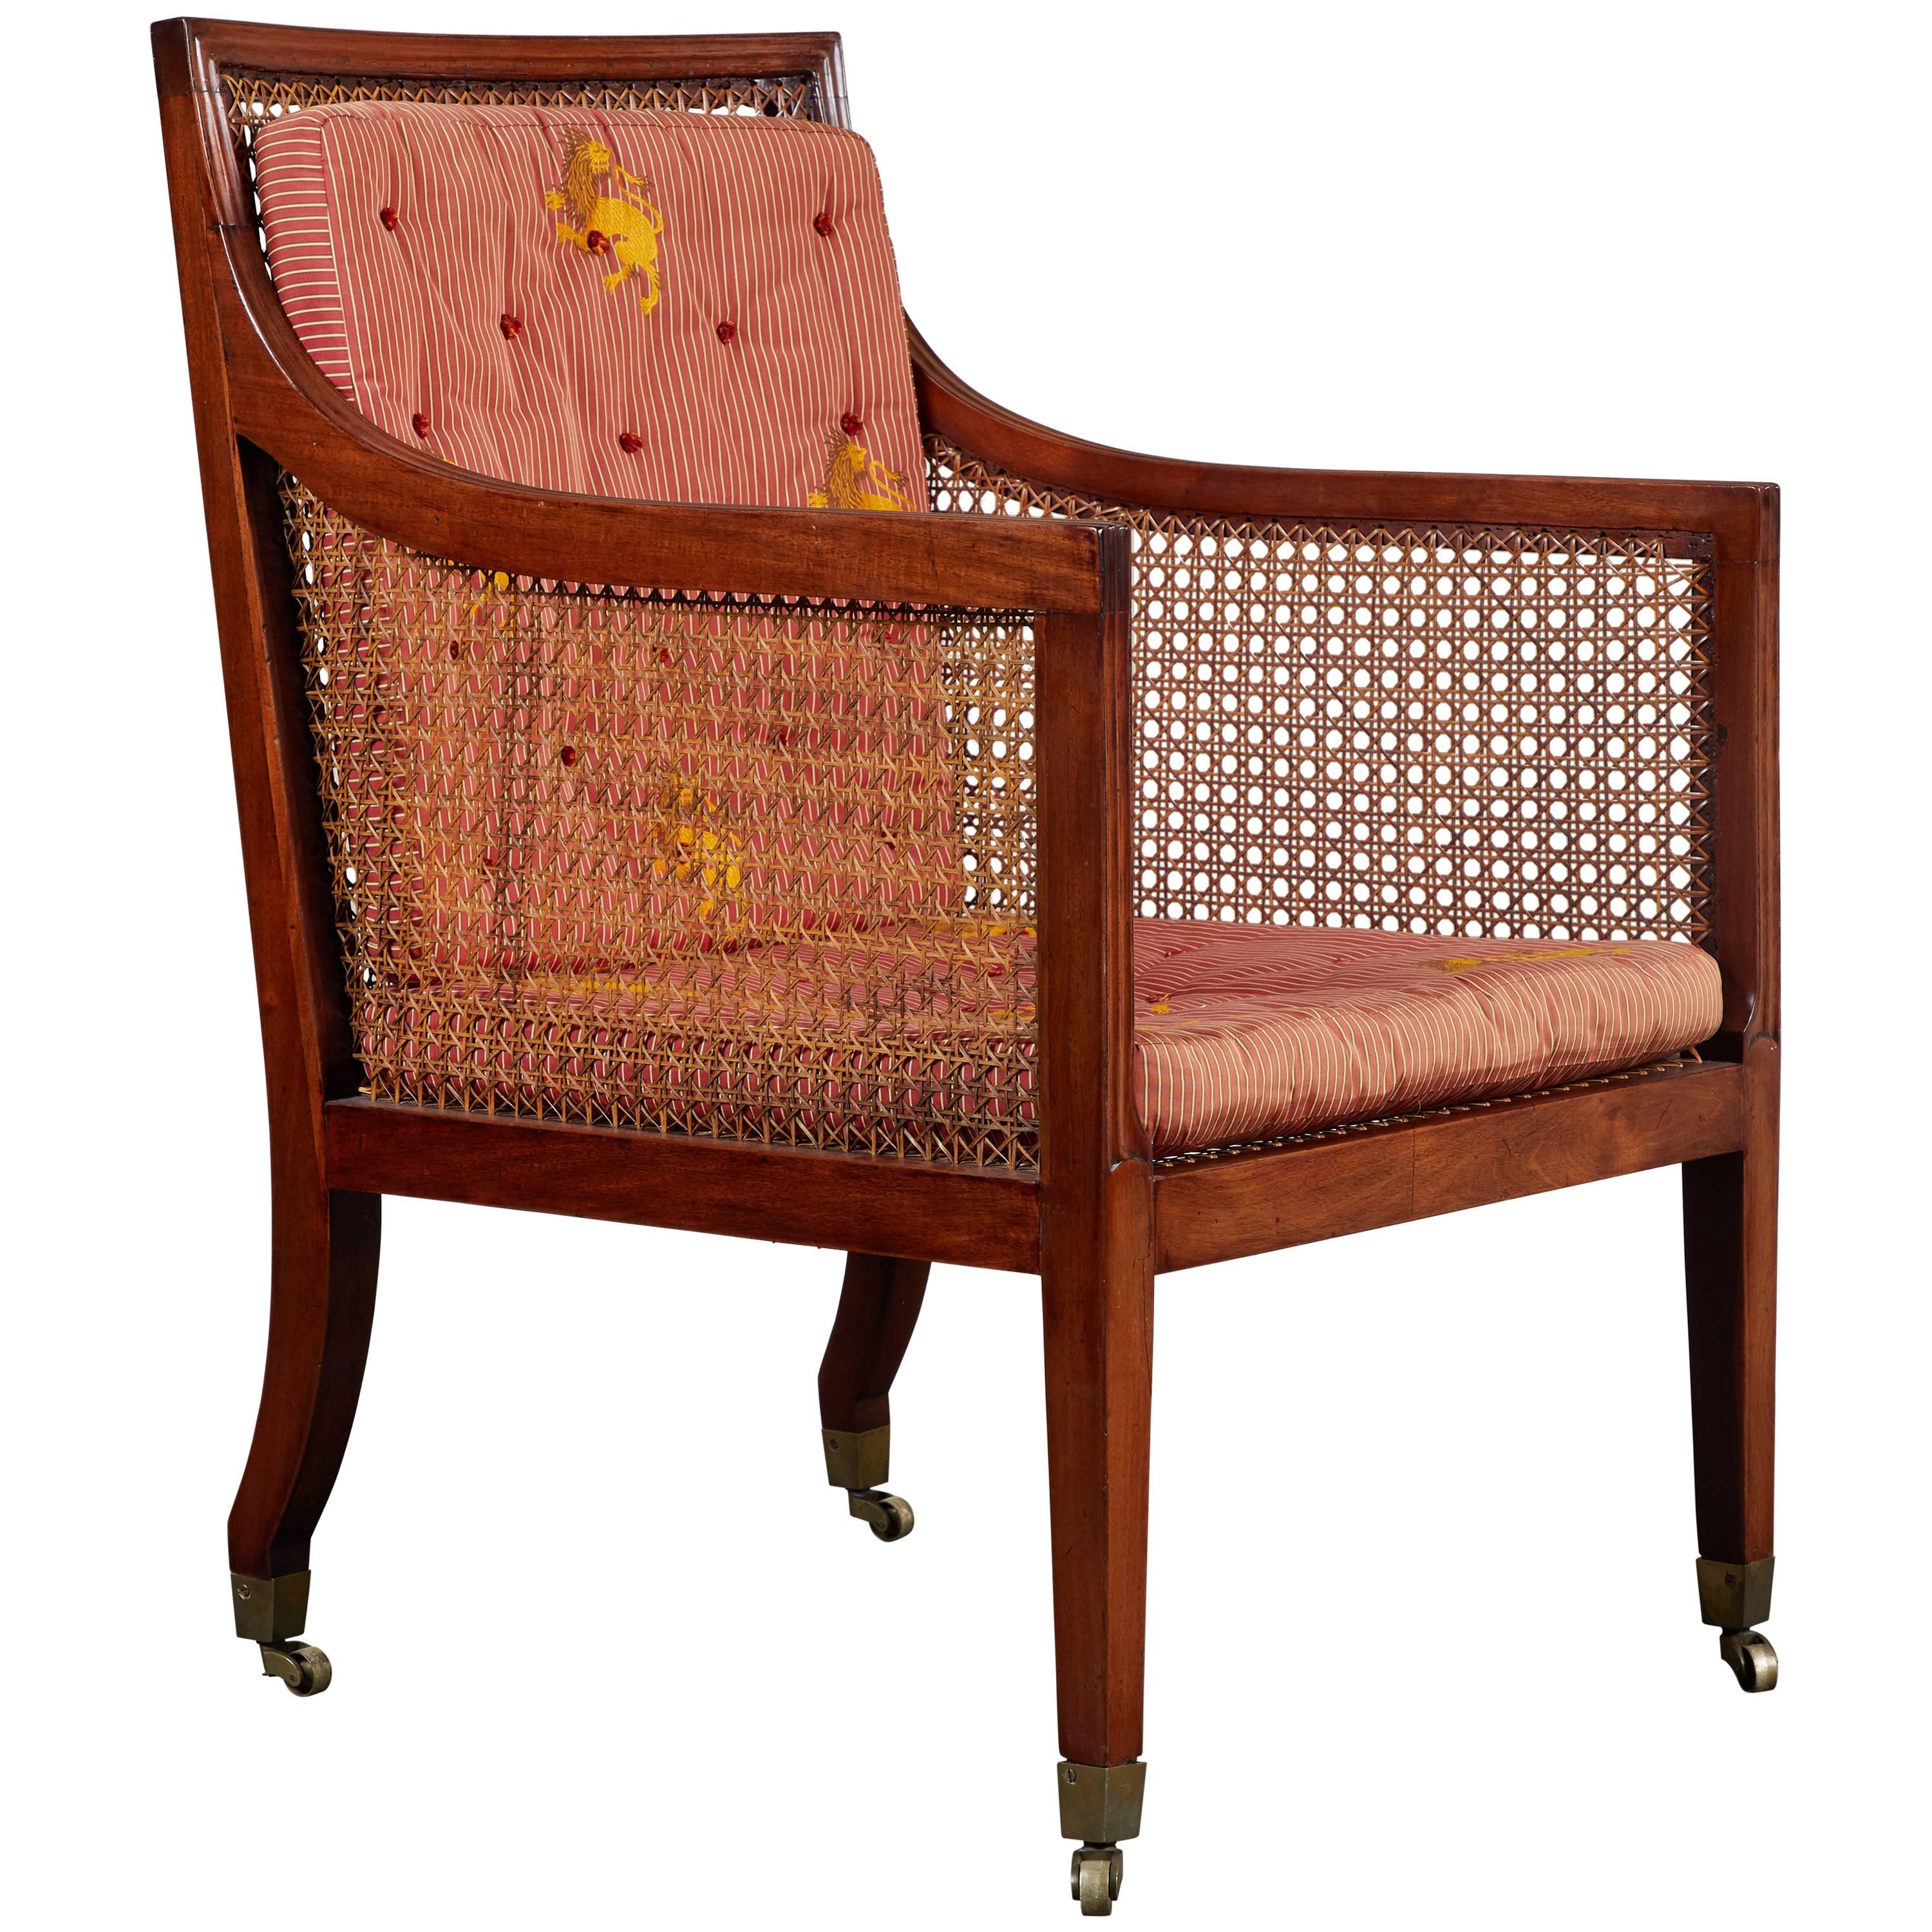 18th Century George III Mahogany Caned Library Chair on Castors